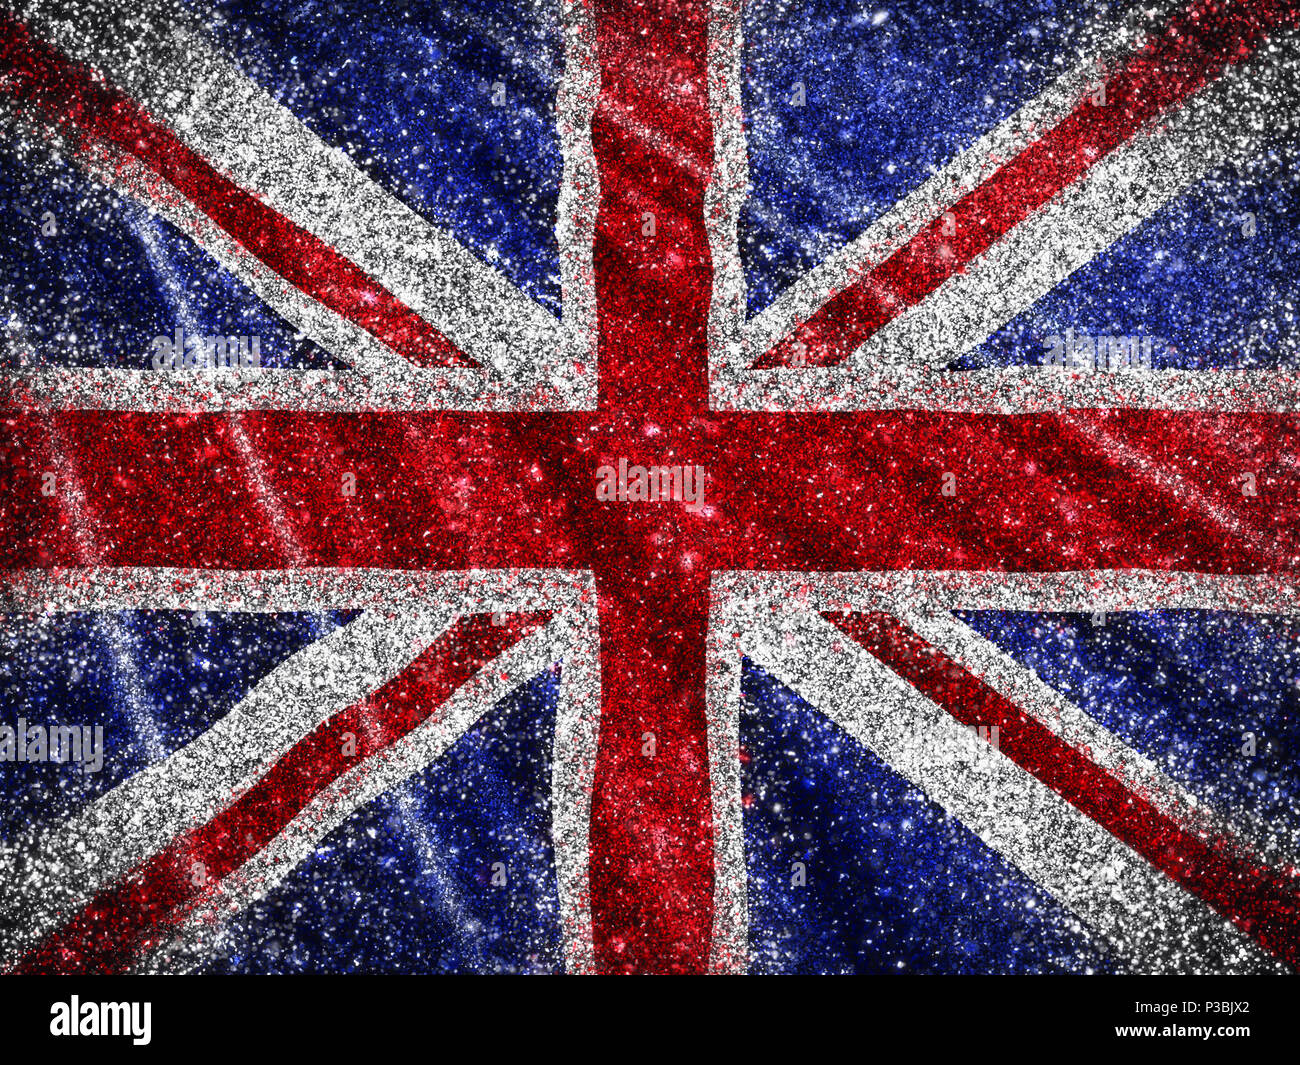 Union Jack Flag background with a glittery effect Stock Photo